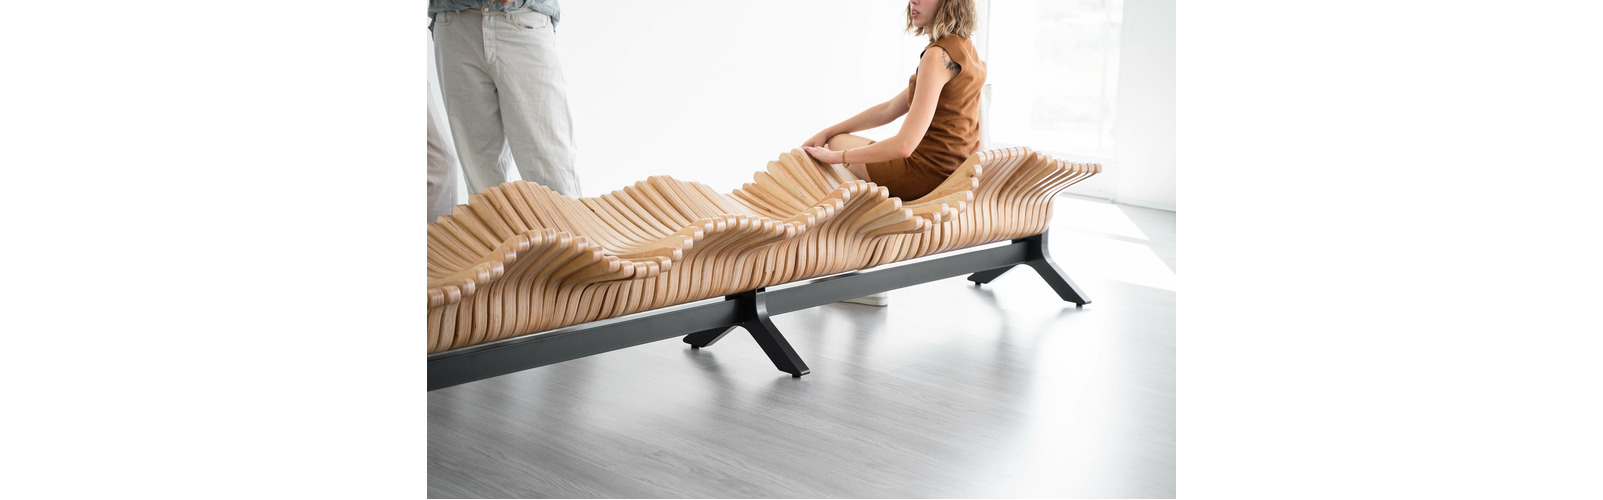 Kald Design - SurfBench - Day and Age